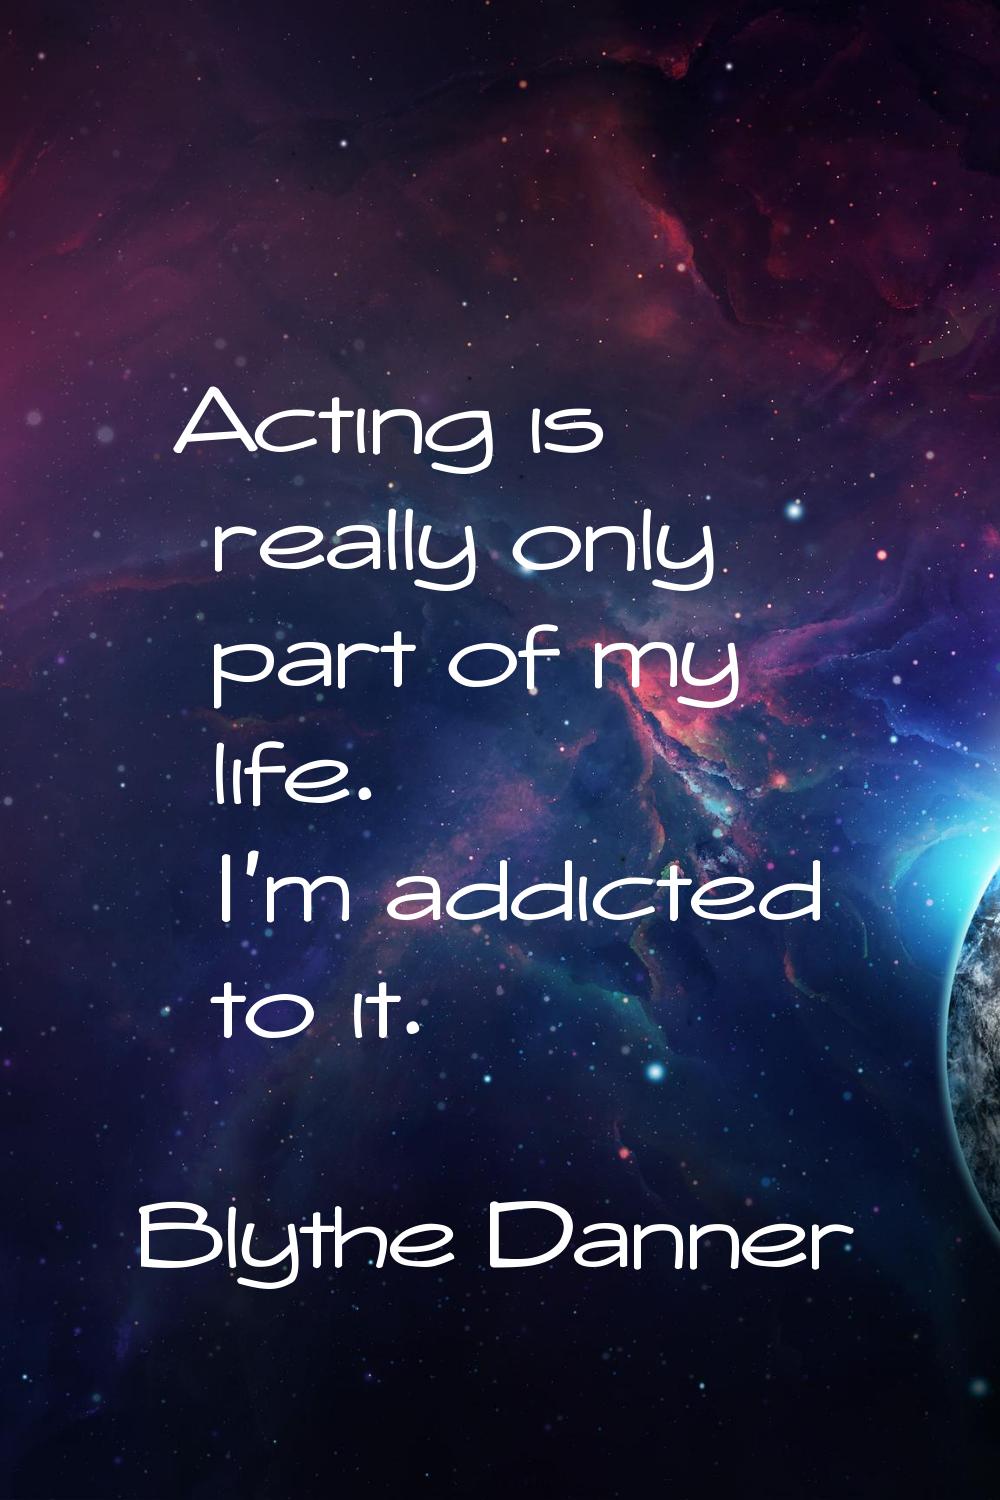 Acting is really only part of my life. I'm addicted to it.